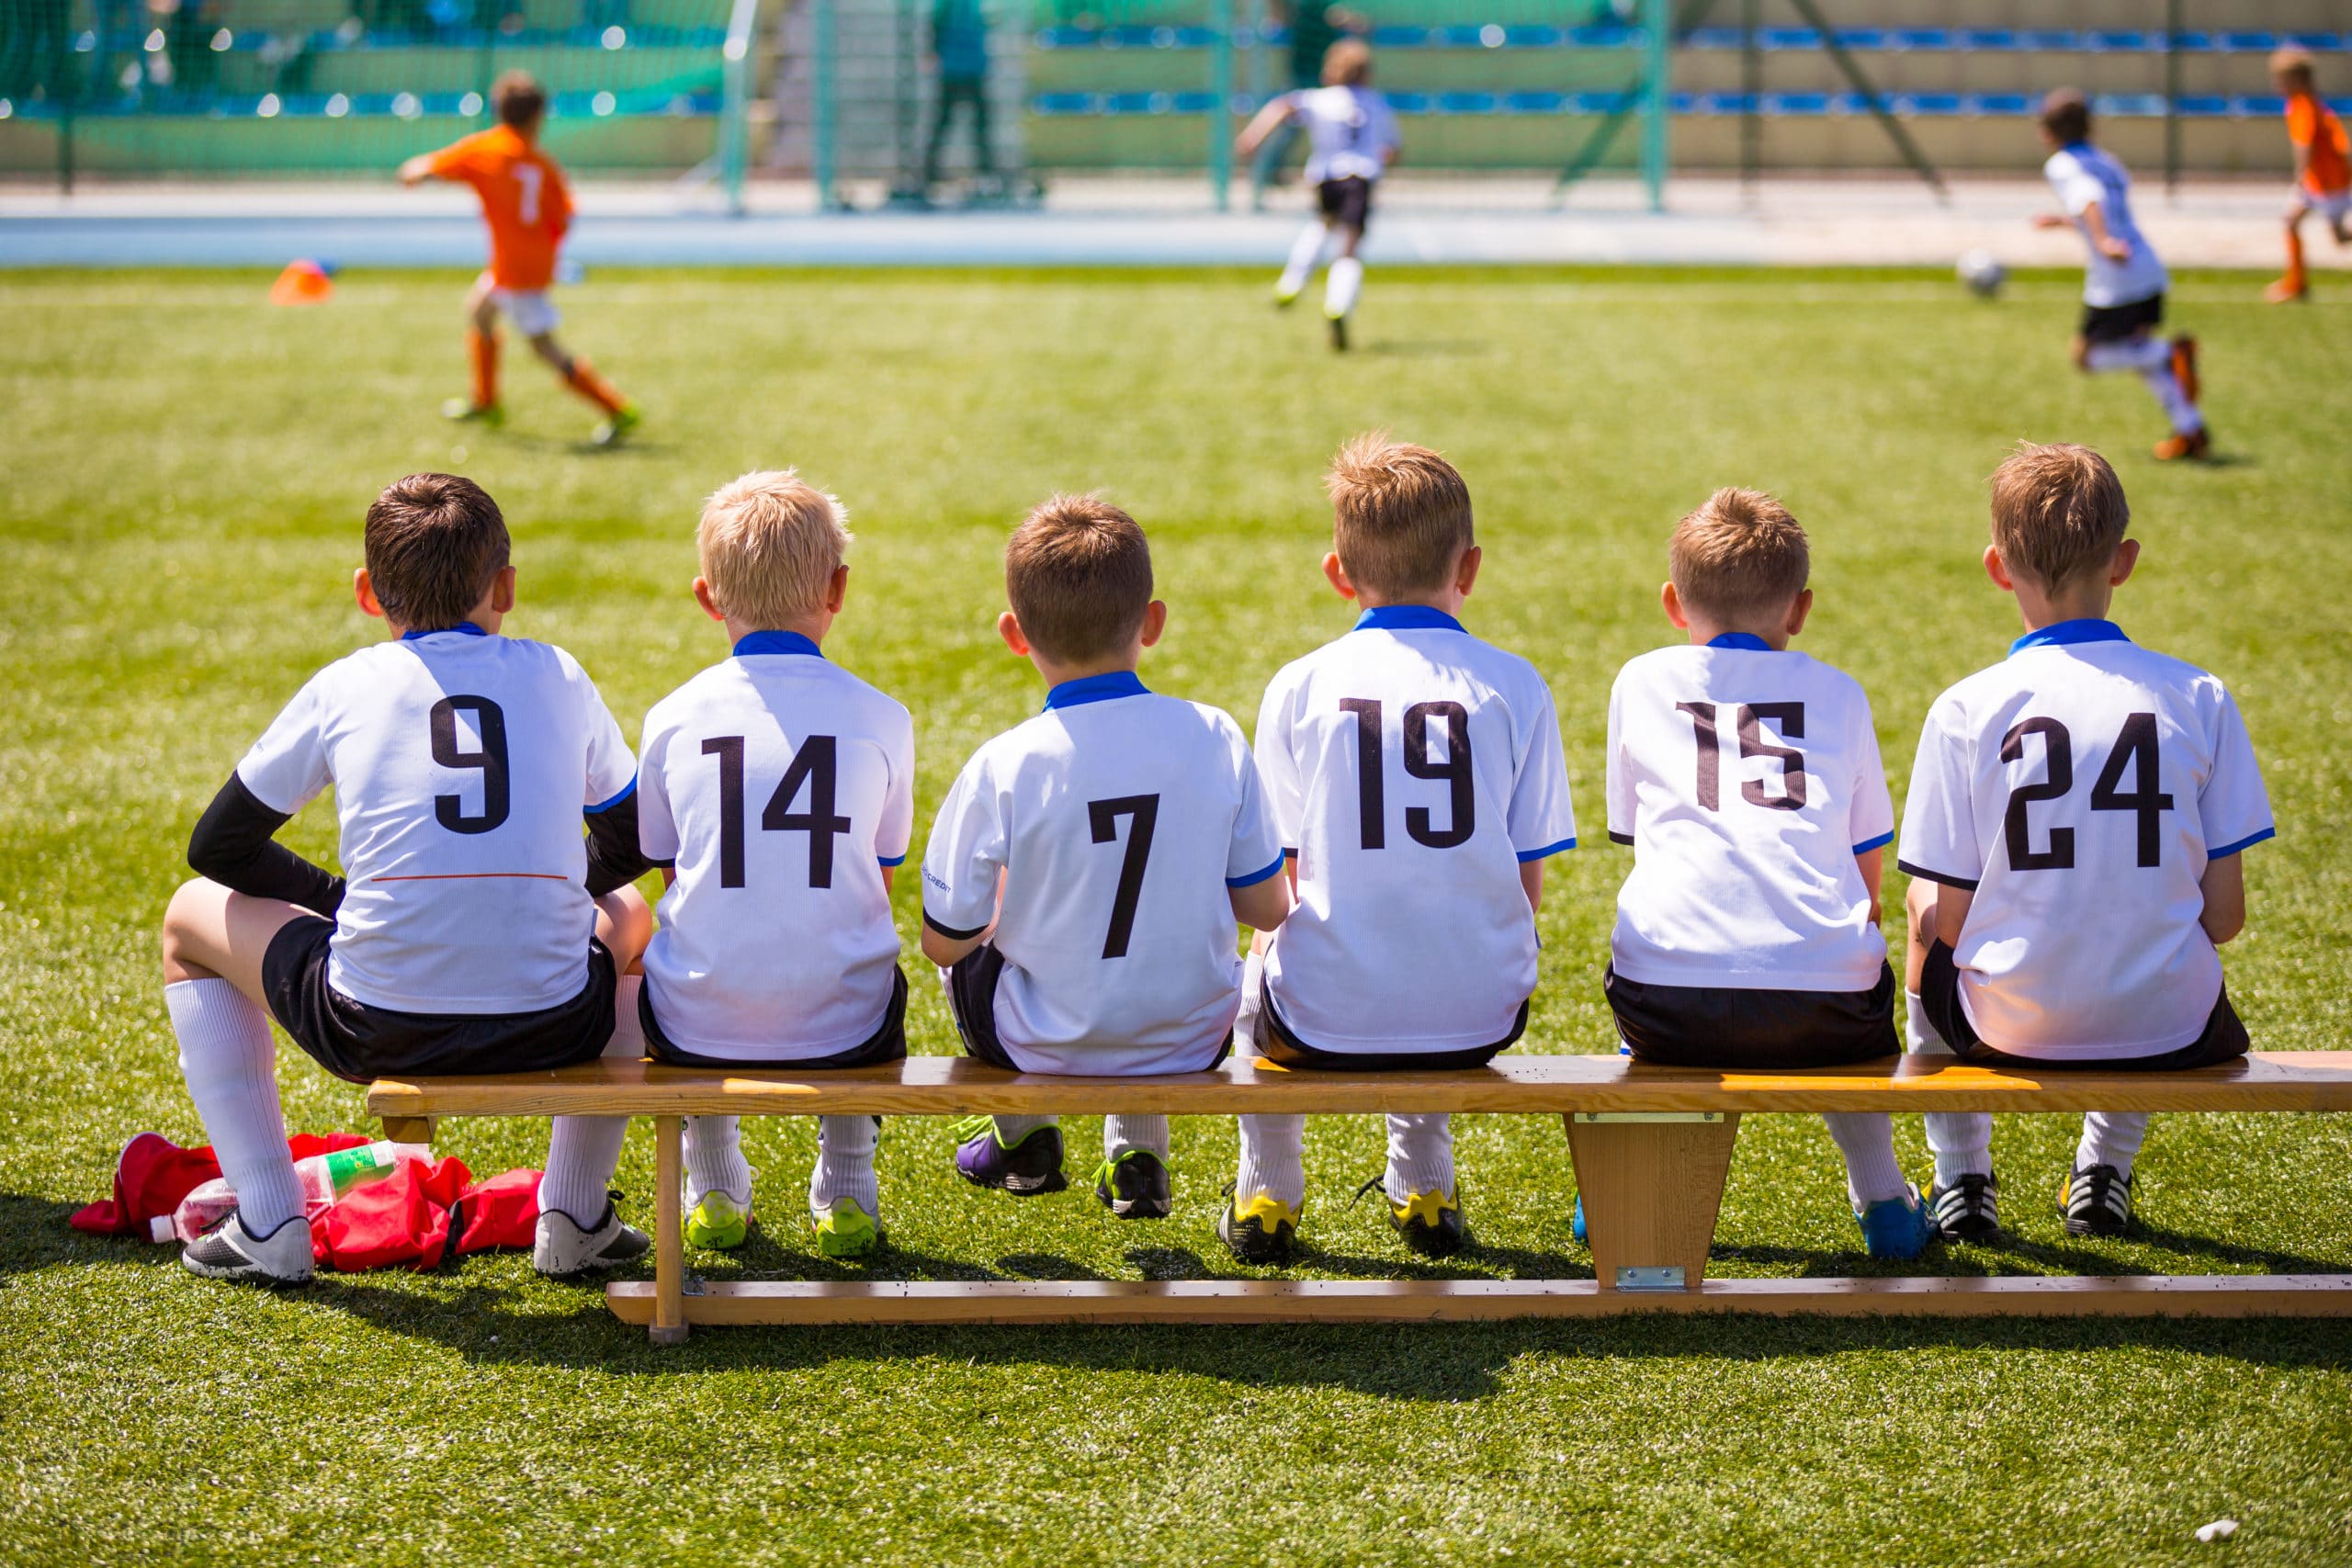 5 Tips for Starting a Club Sports Team